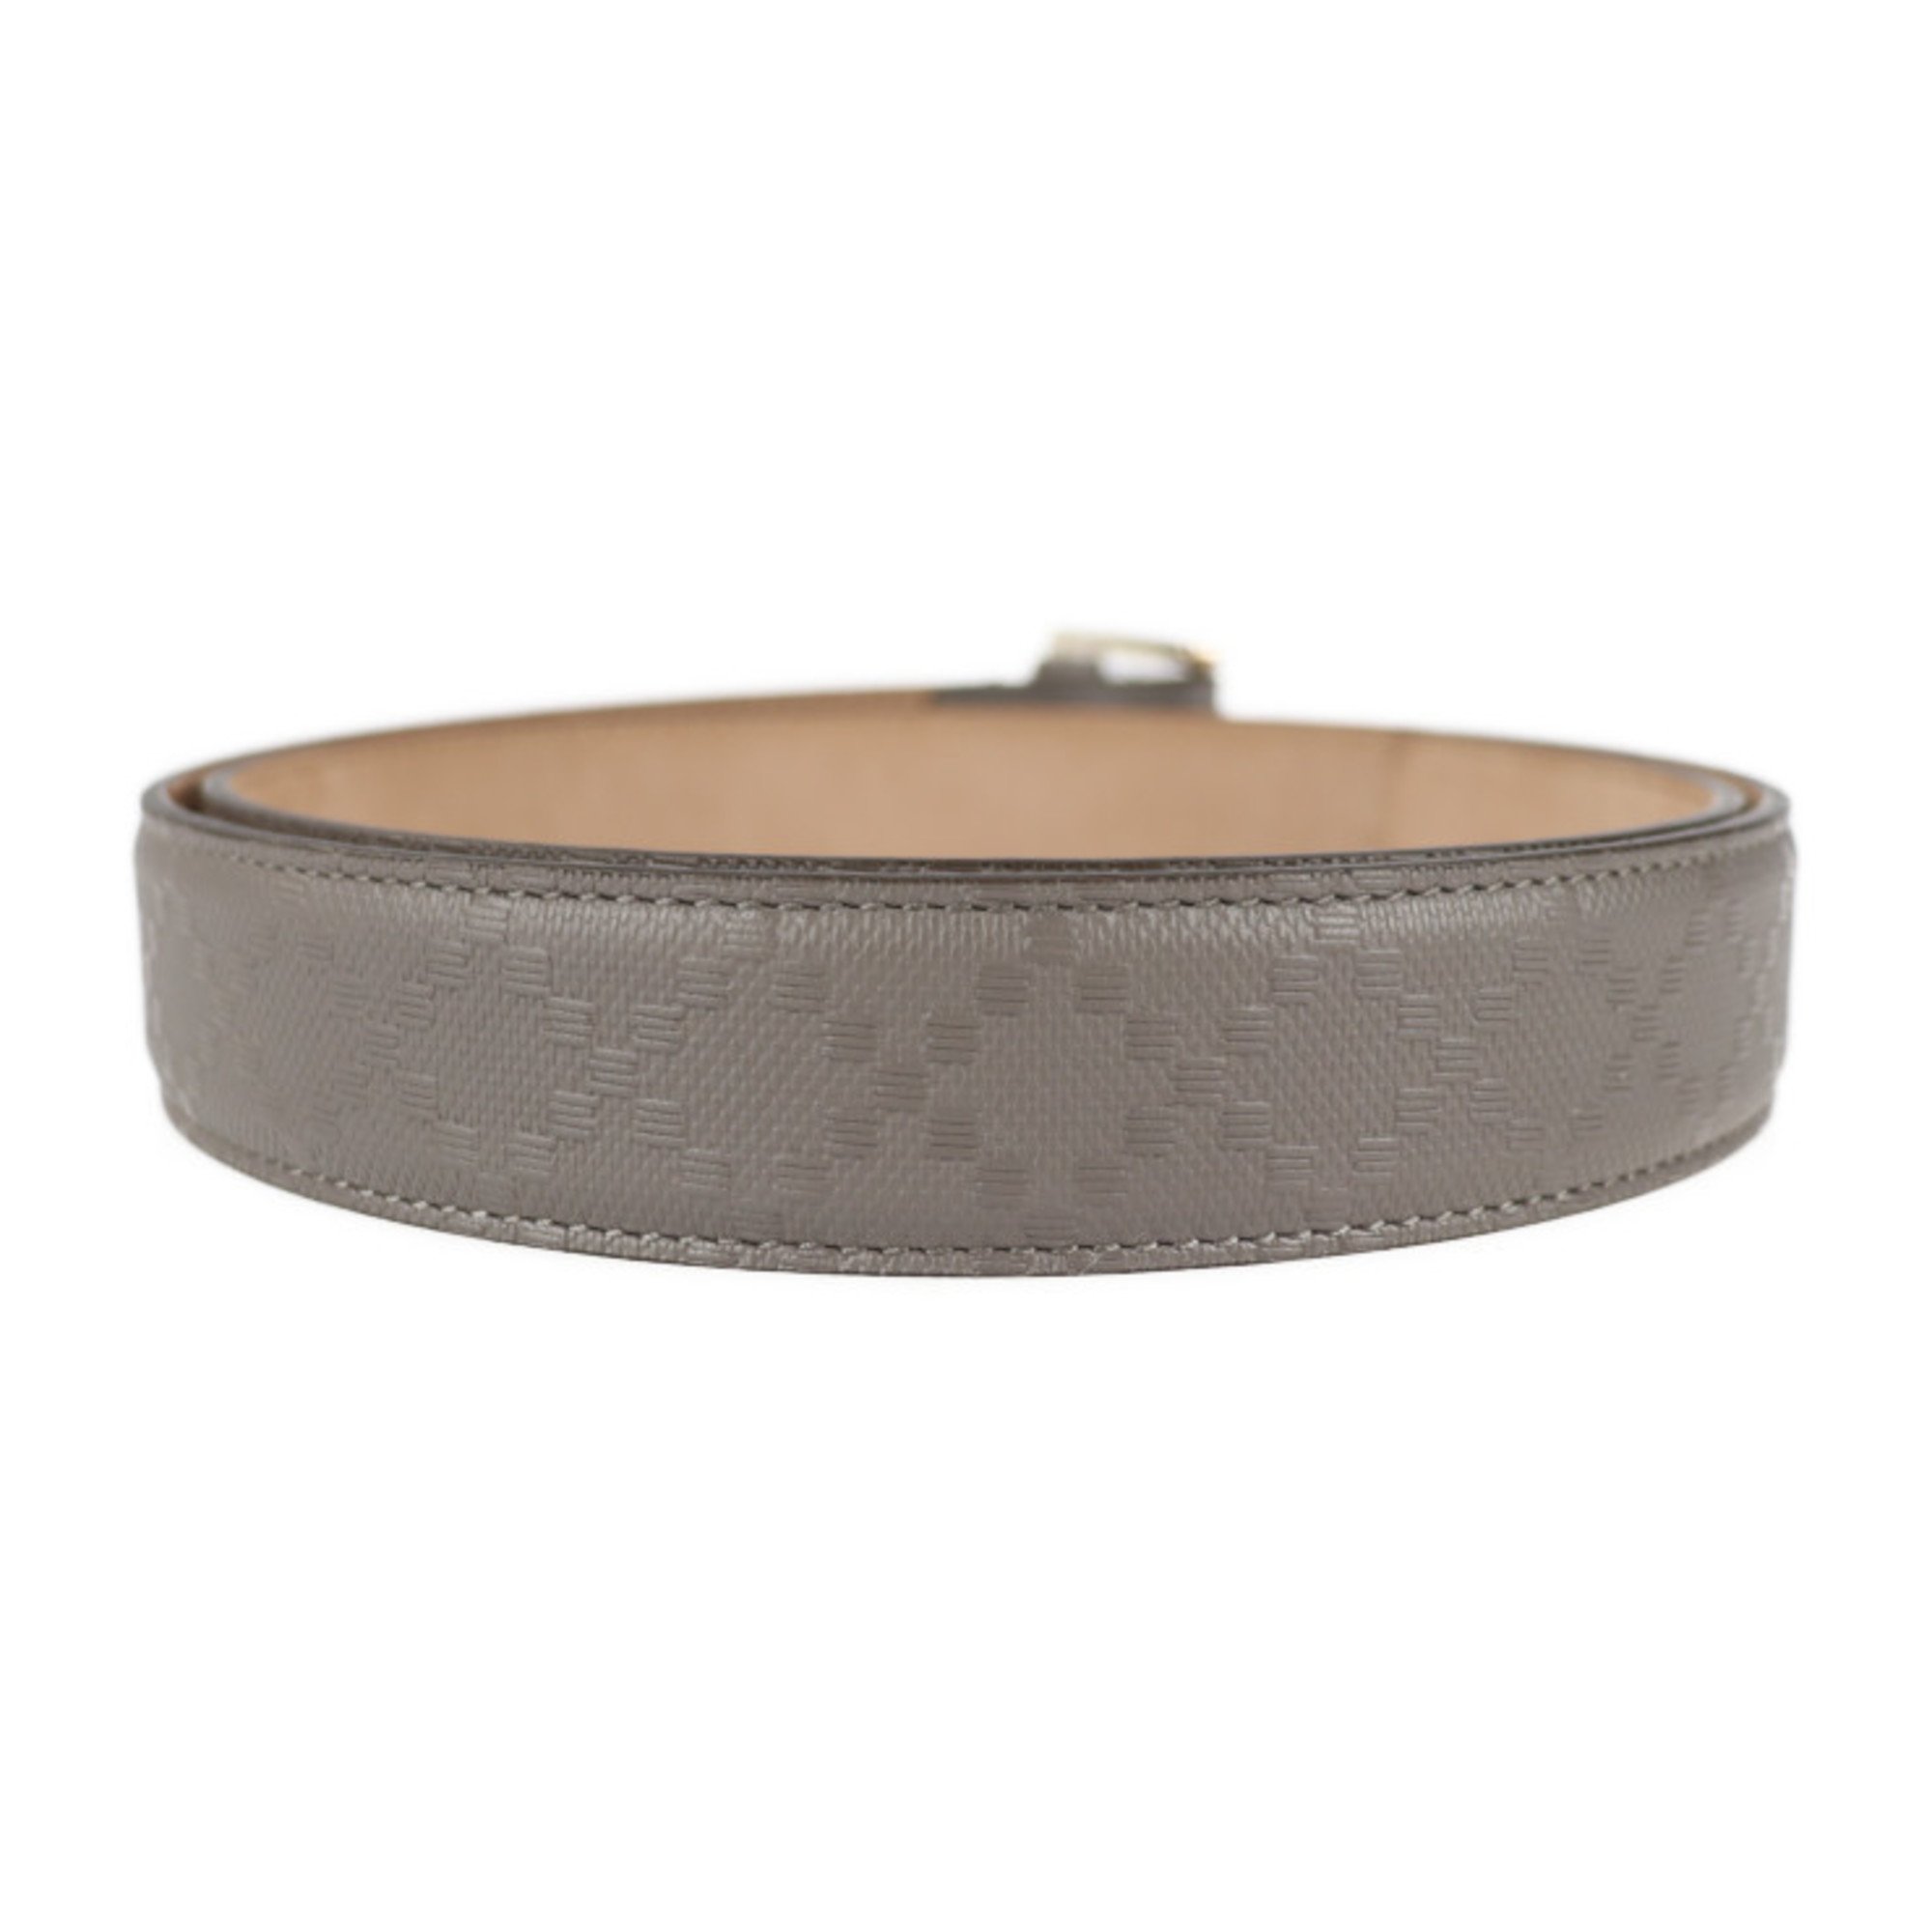 GUCCI Gucci Diamante Belt 345658 Notation Size 85/34 Leather Gray Series Gold Metal Fittings